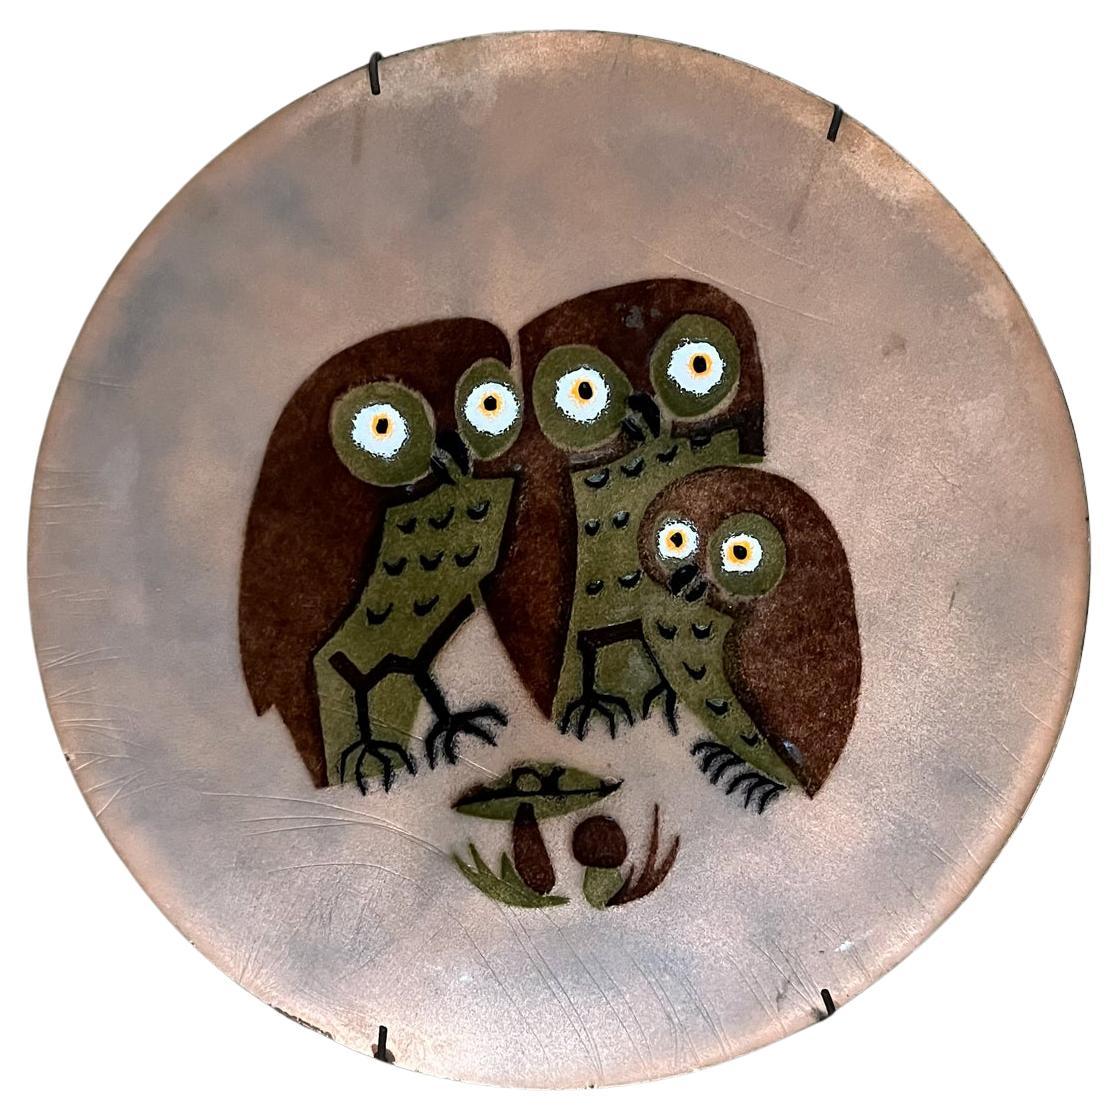 1960s Hand Crafted Enamel OWL Plate by Annemarie Davidson Sierra Madre, Calif